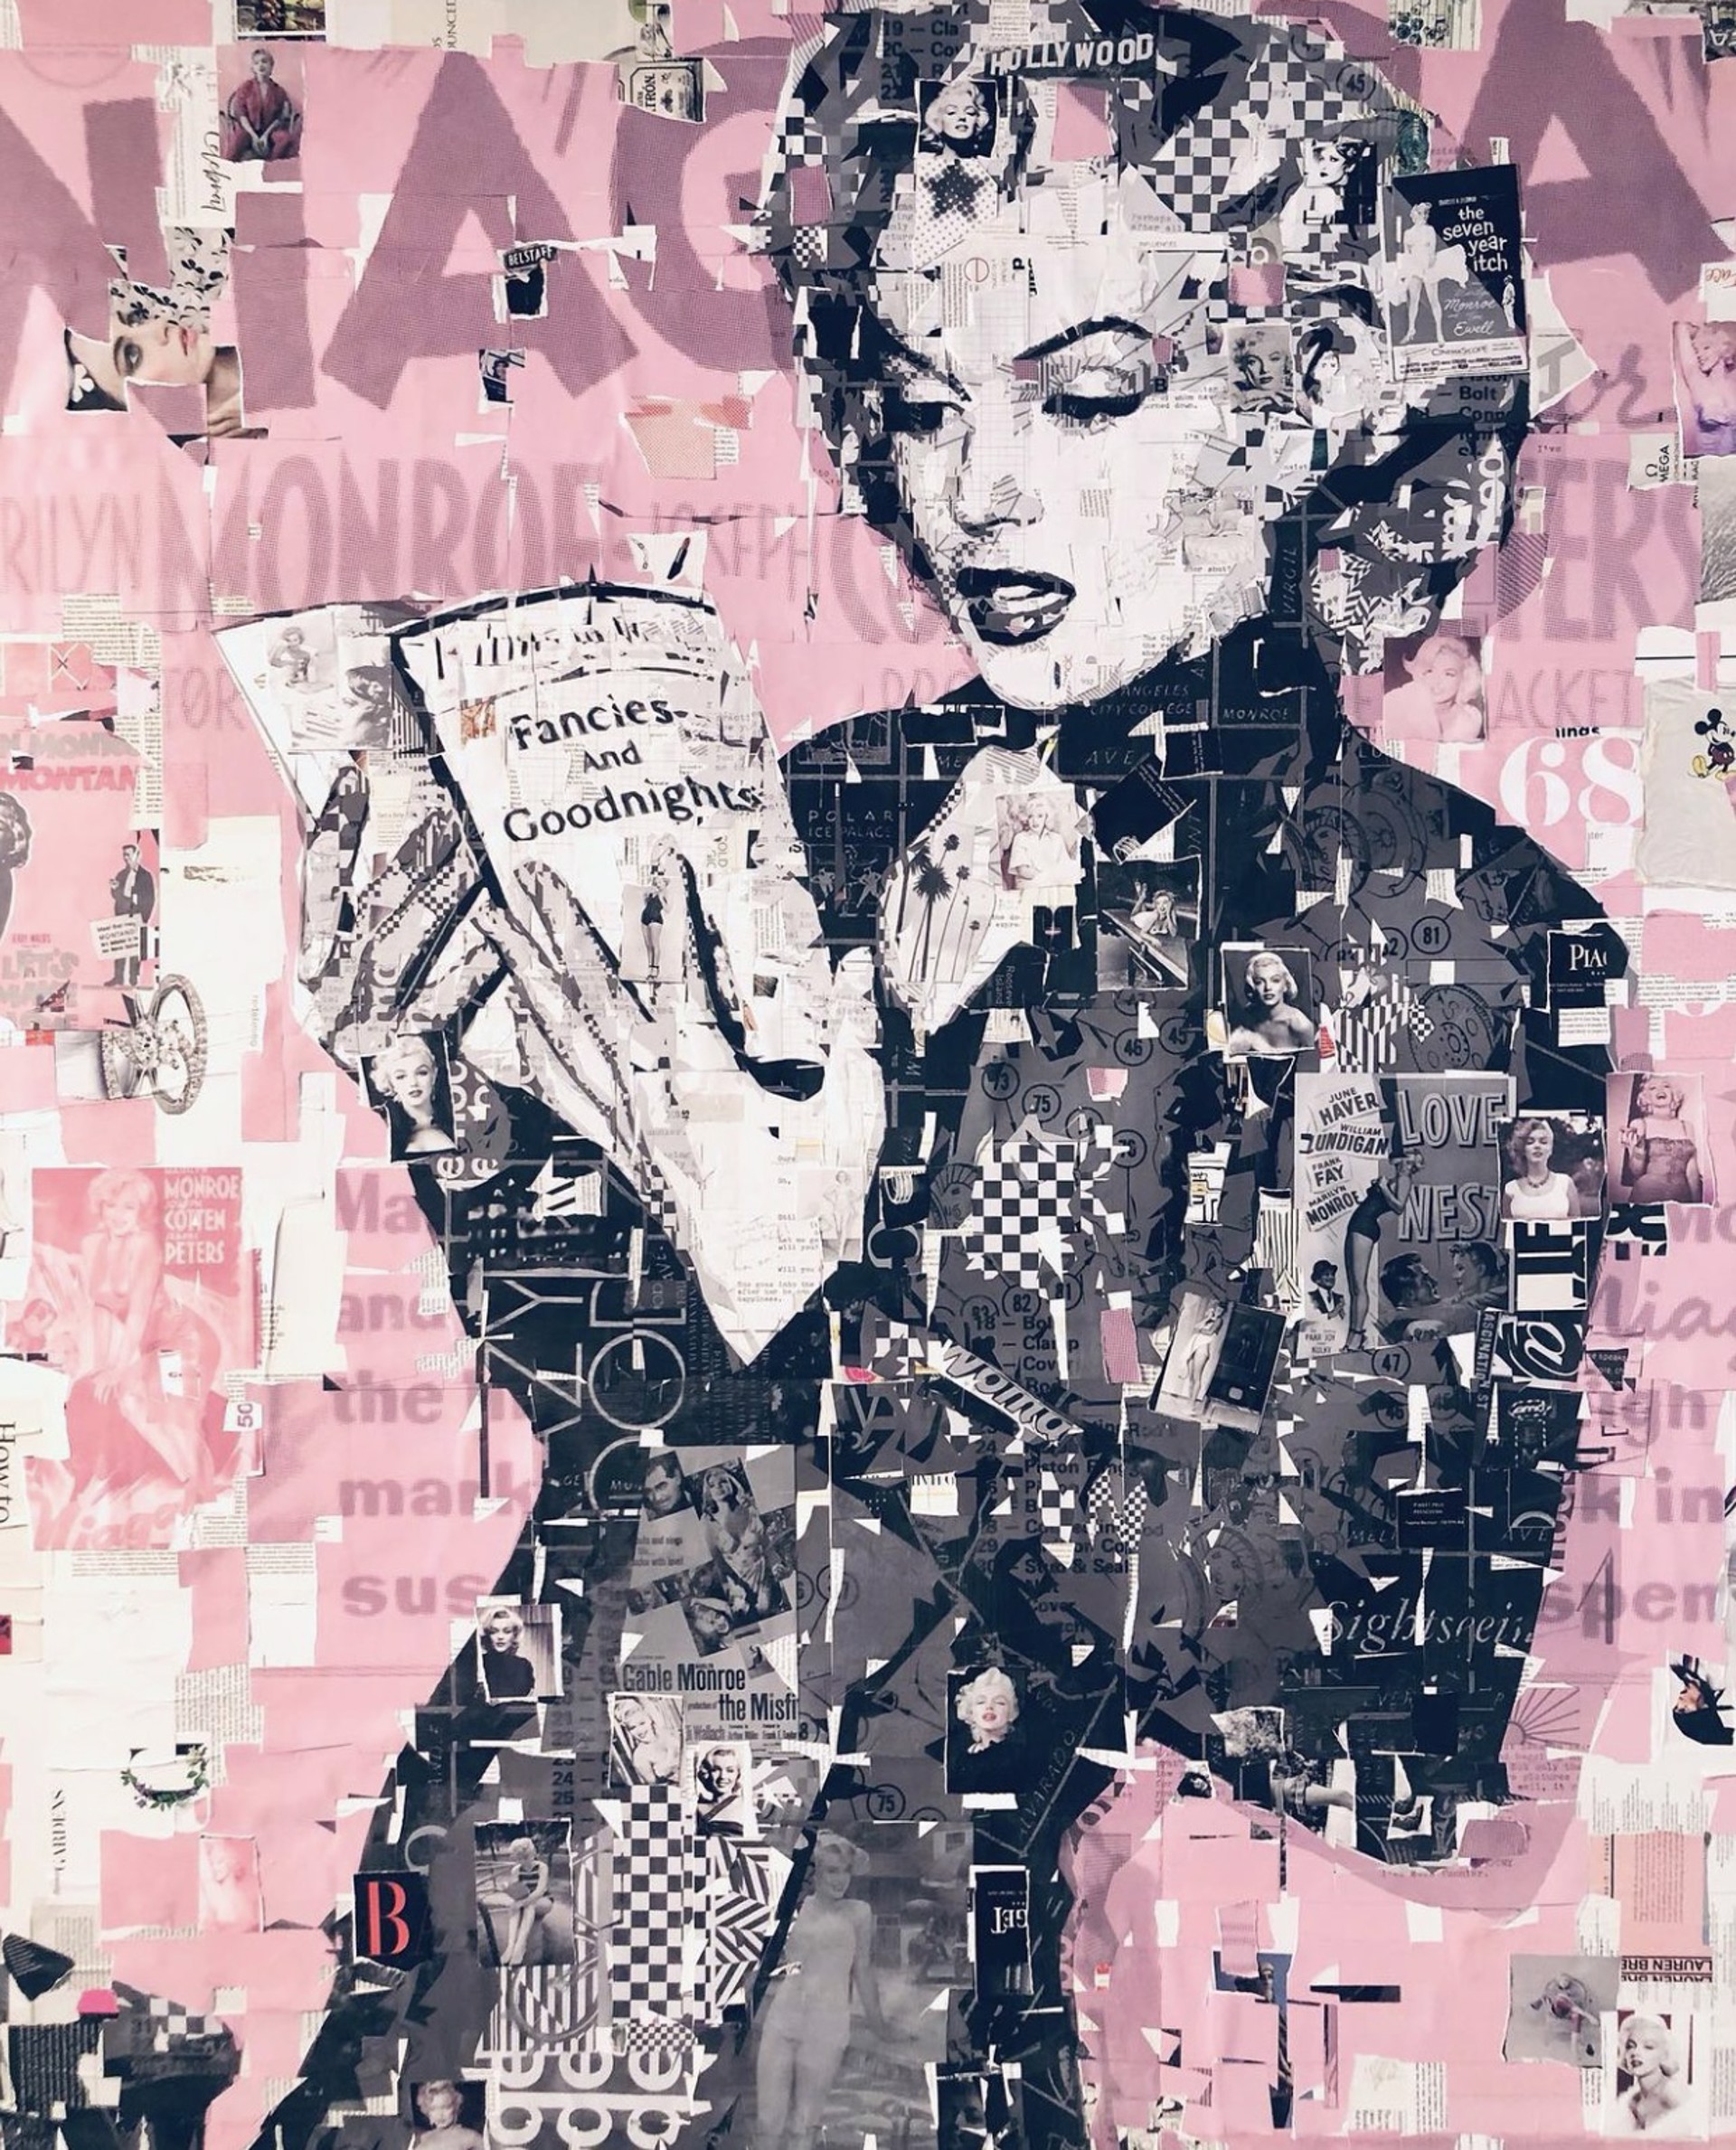 Marilyn: Fancies and Goodnight by Derek Gores